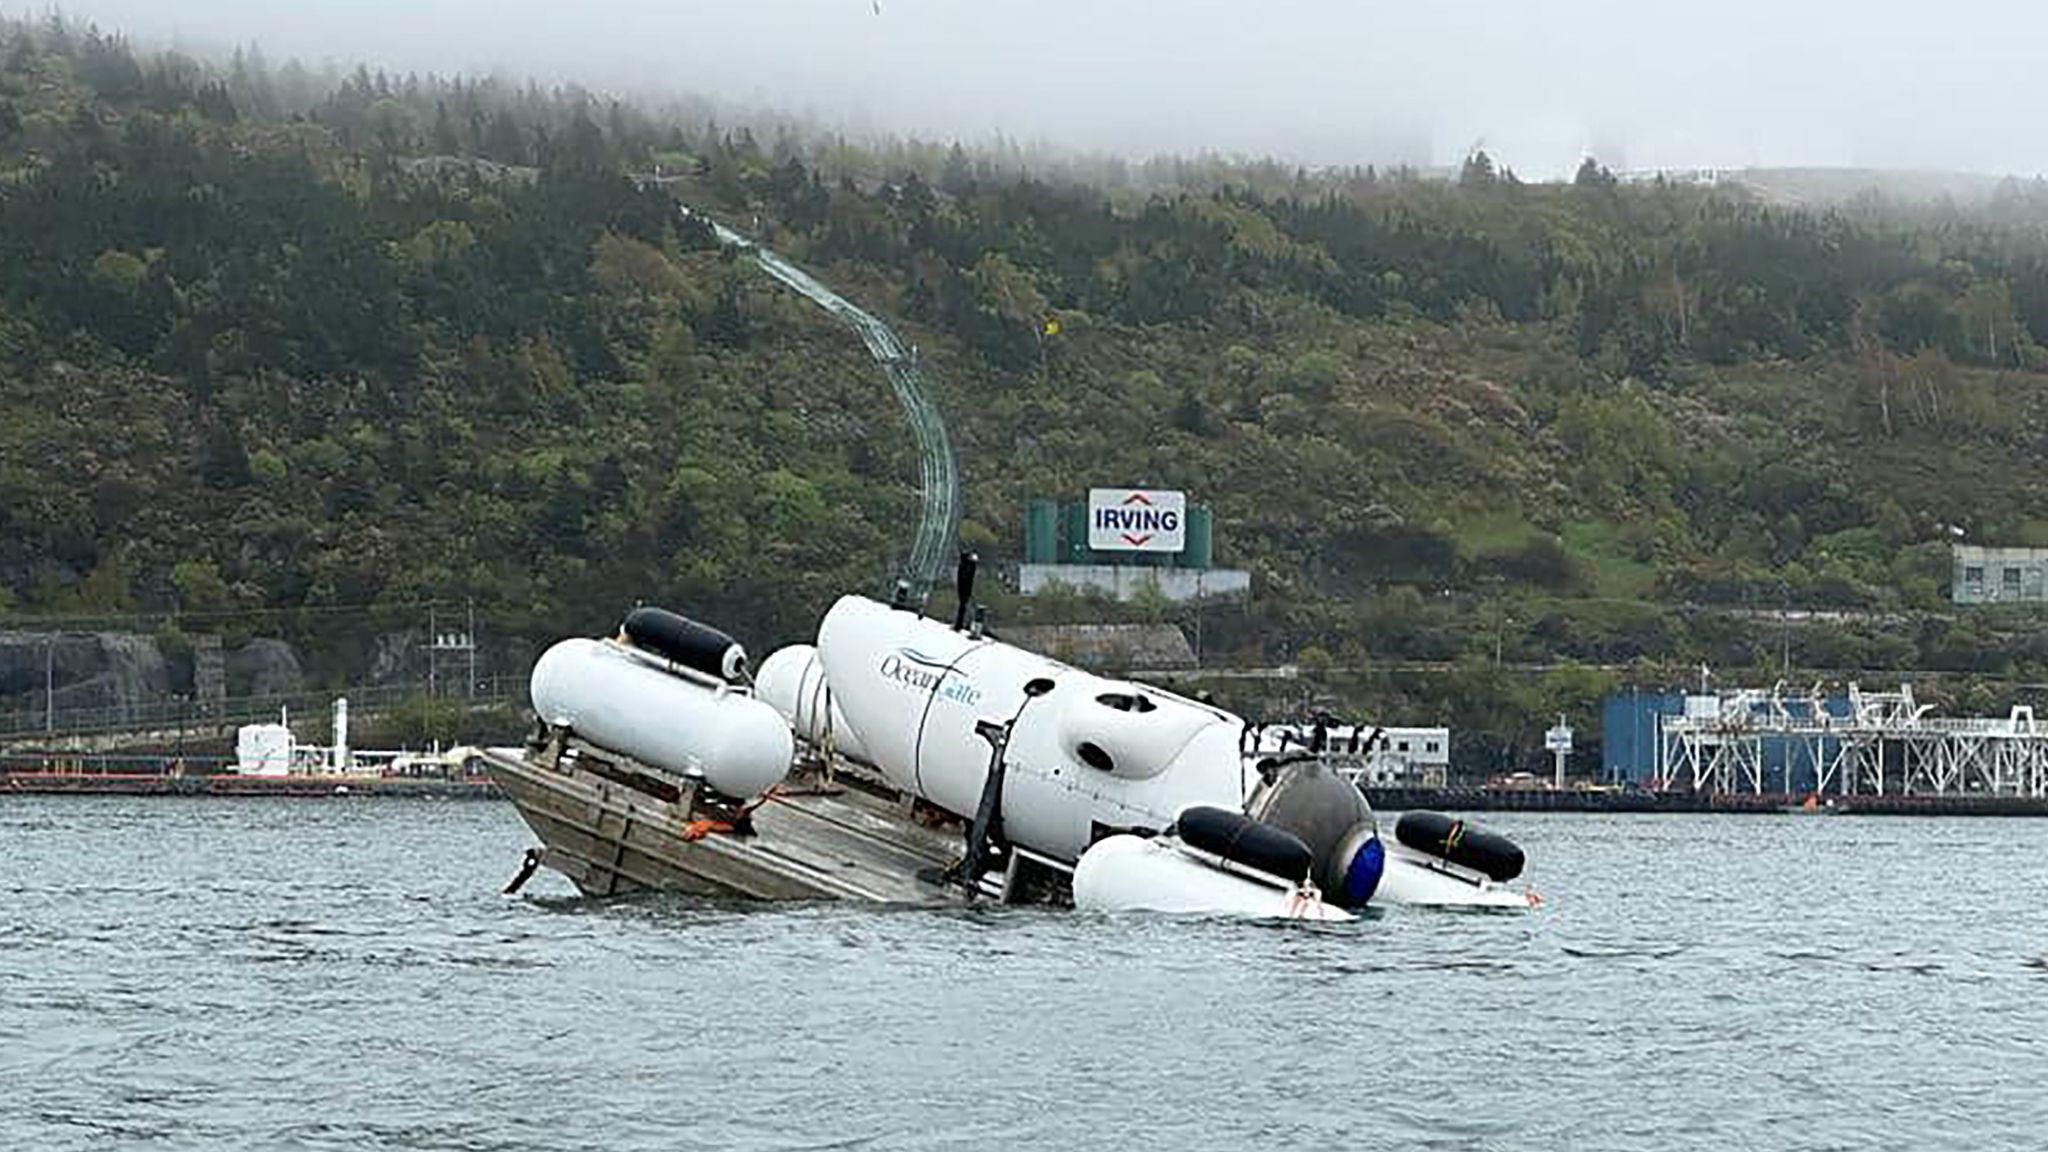 The 'Titan' Submersible Disaster Was Years in the Making, New